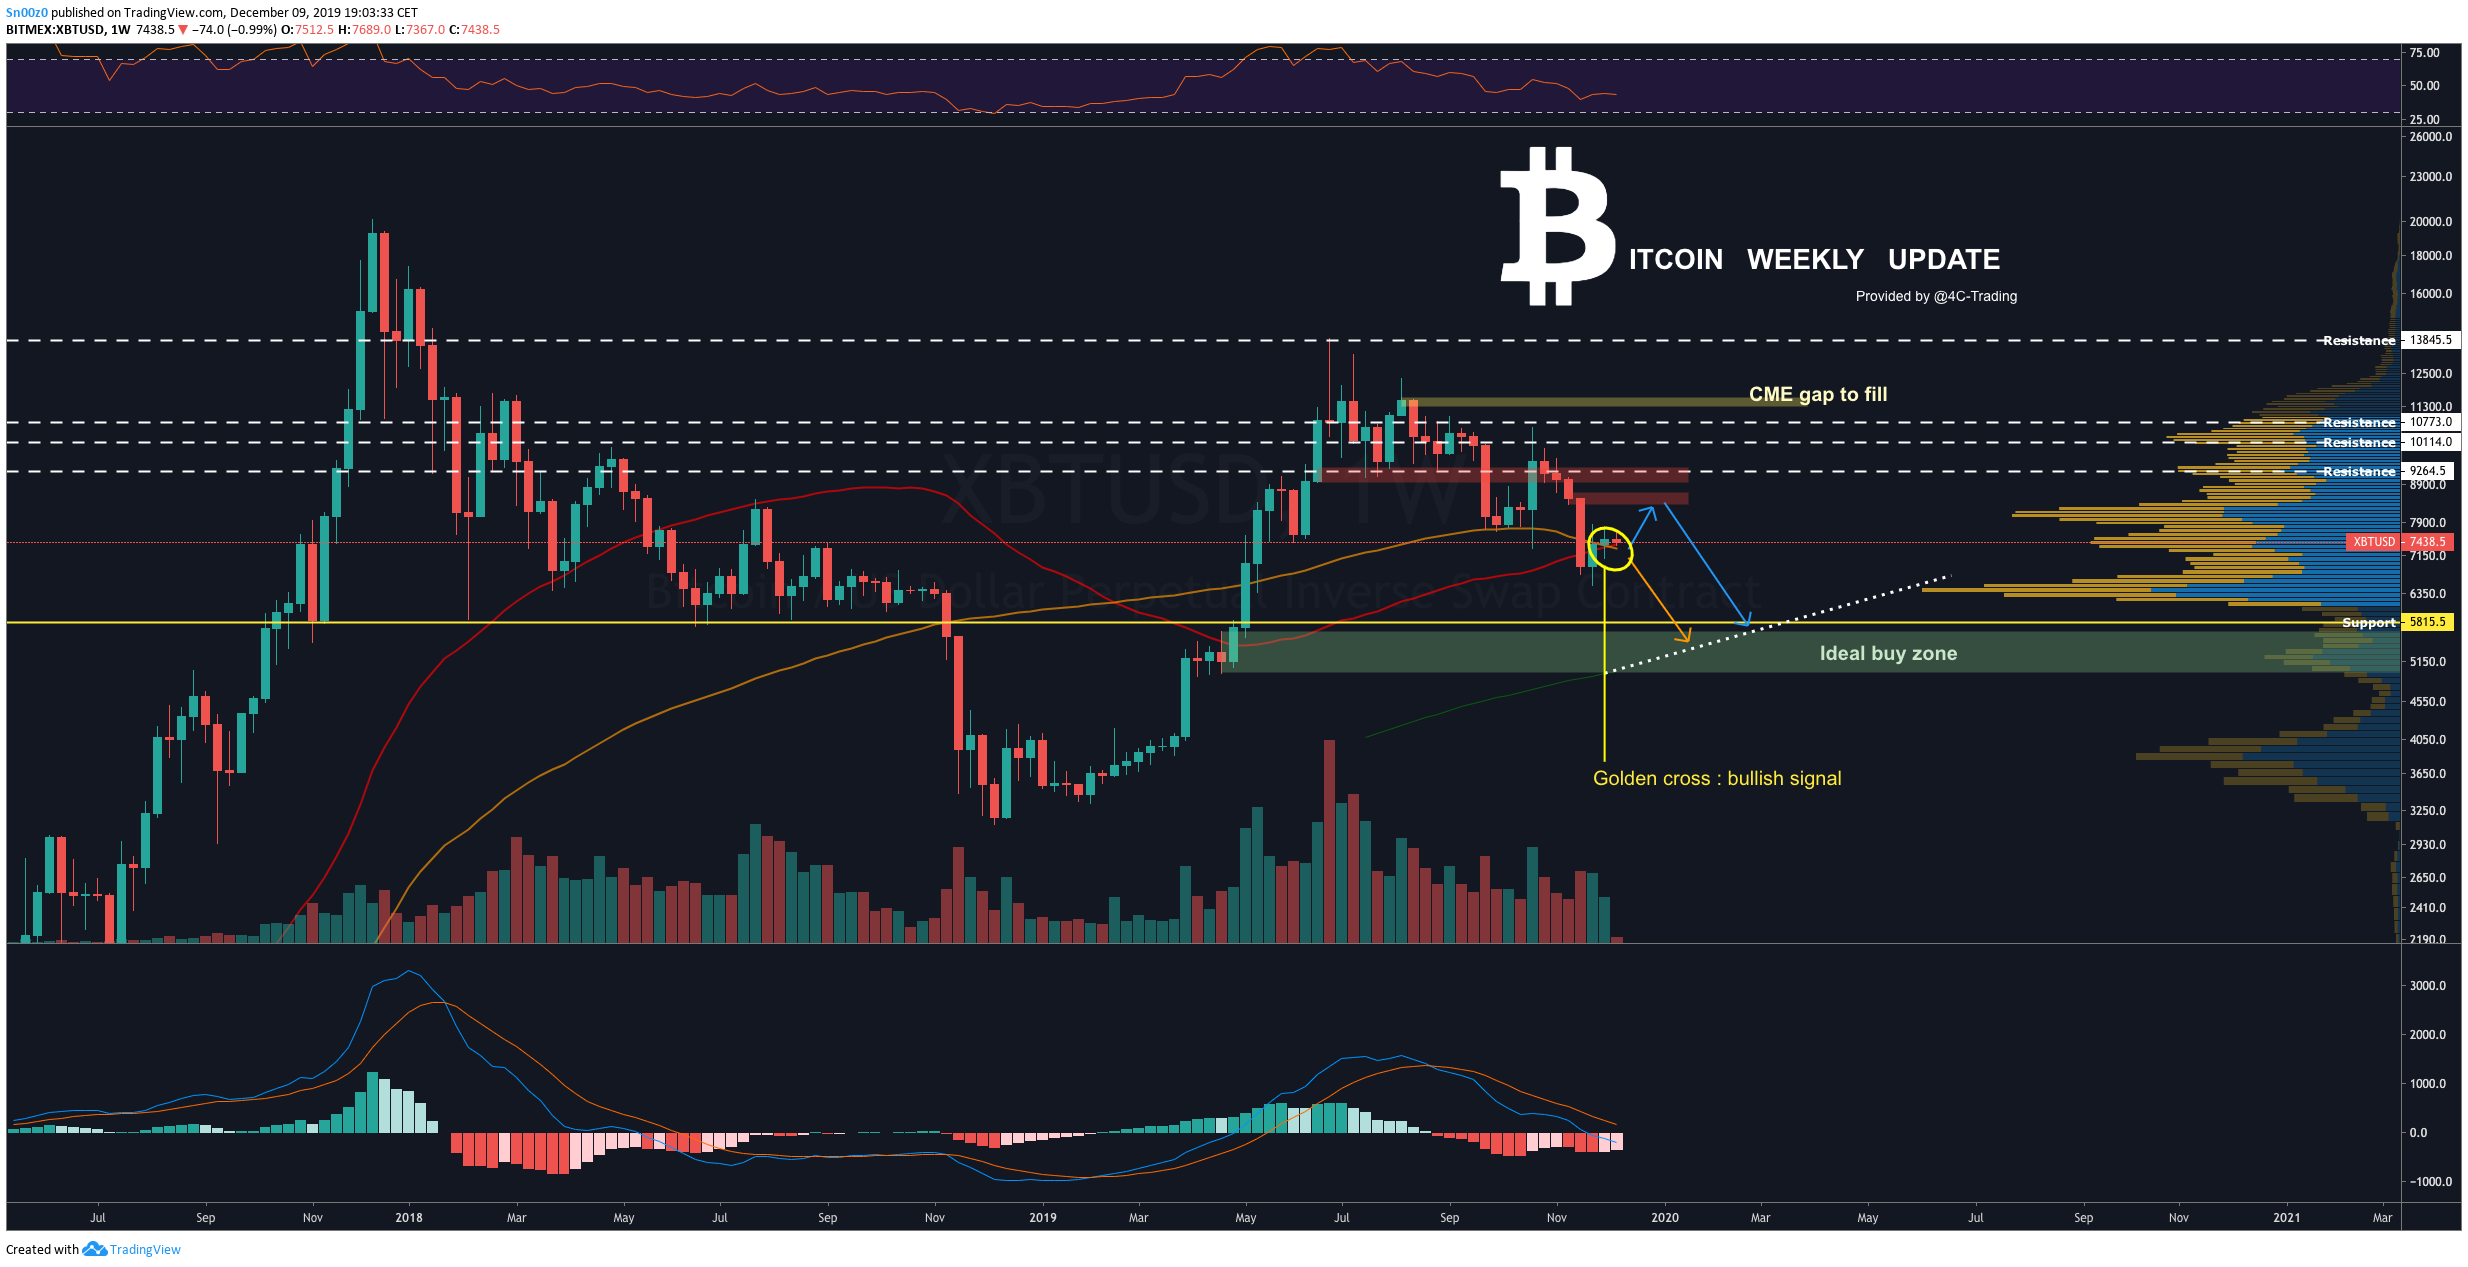 Bitcoin Weekly Update #13 - 4C Trading